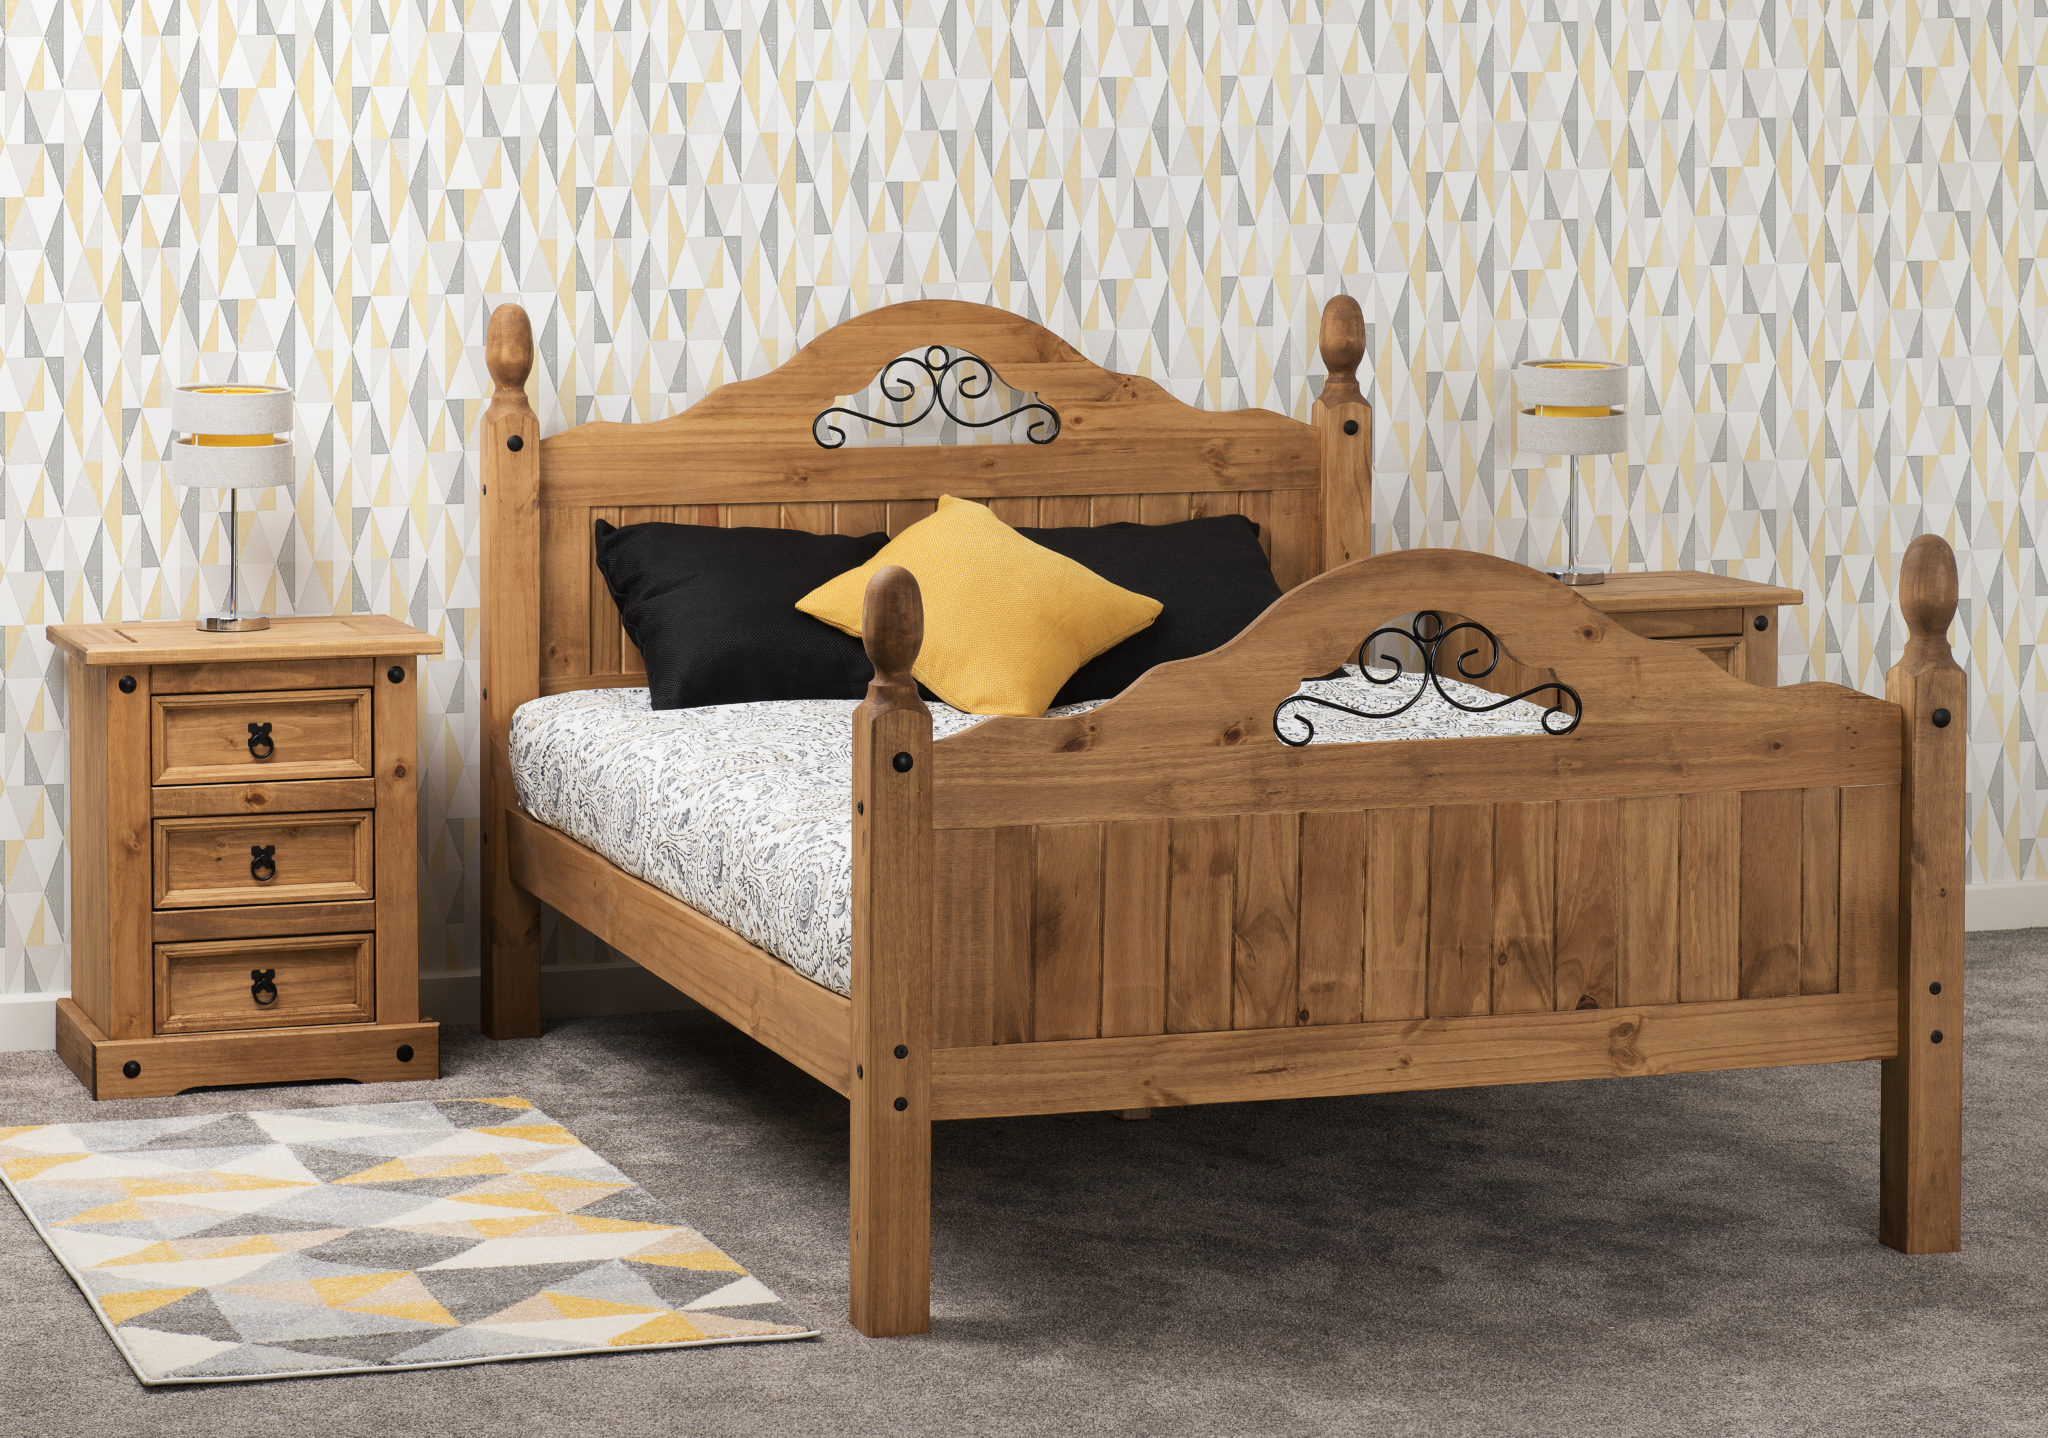 Seconique Corona Scroll 4 Feet 6 inch Bed High Foot End 314.95 x 1189.95 x 79.95 cm Distressed Waxed Pine 